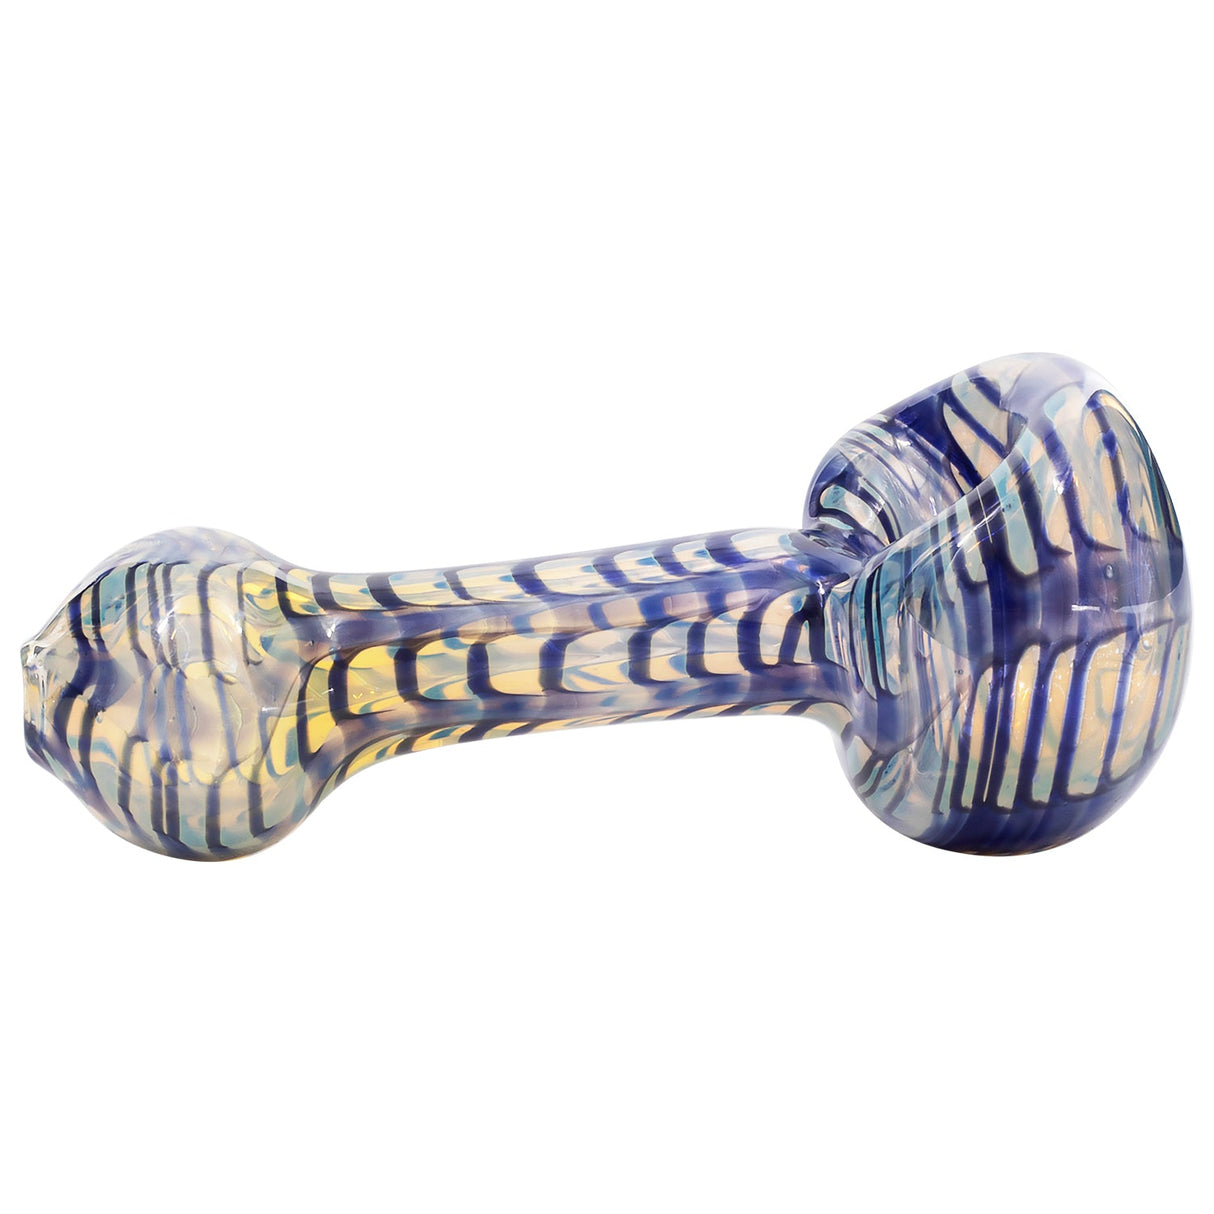 LA Pipes Candy Swirl Glass Spoon Pipe with Fumed Color Changing Design, Side View